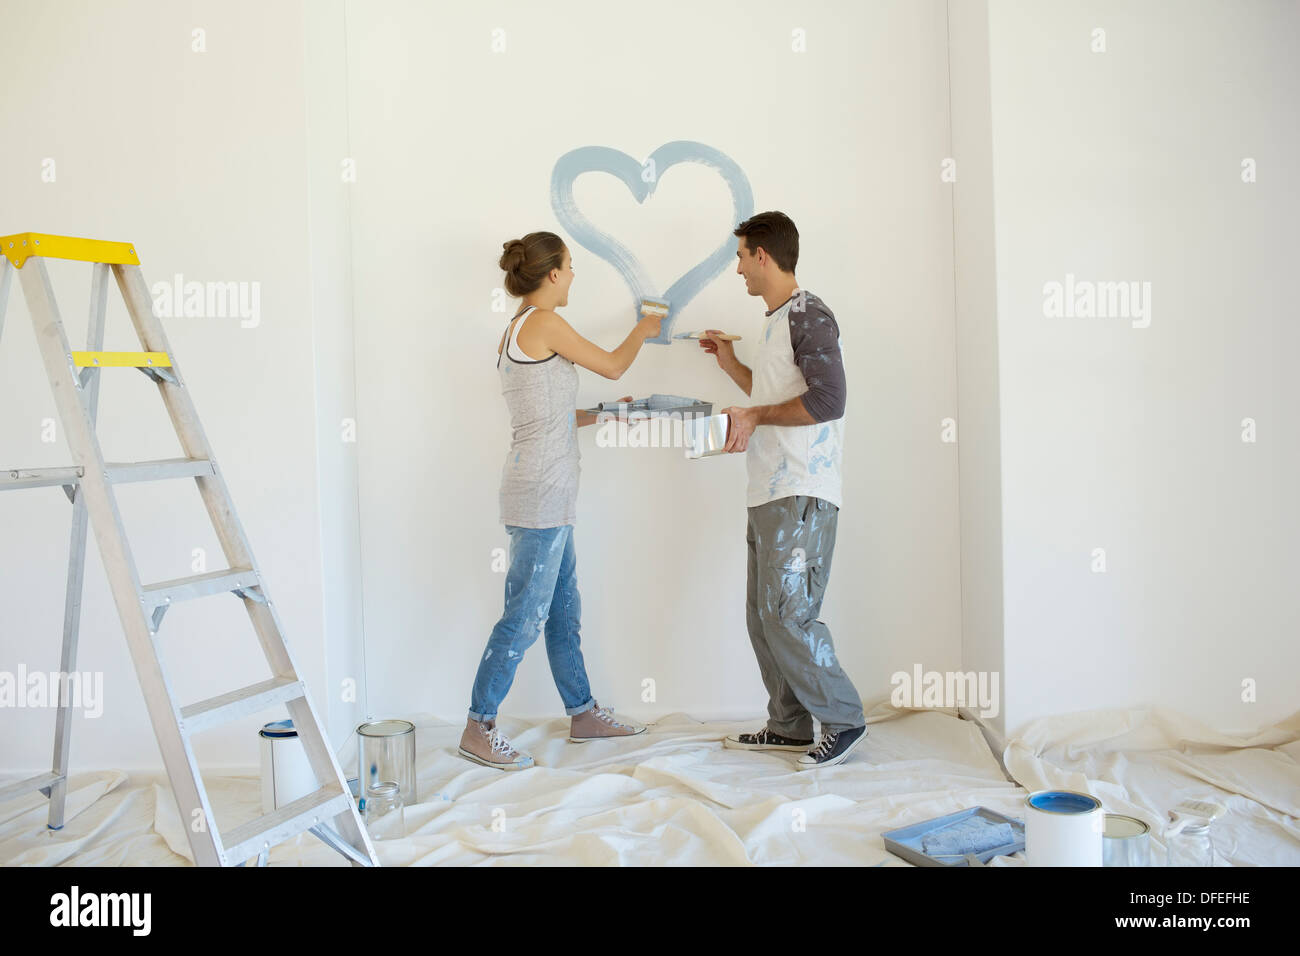 Couple painting blue heart on wall Banque D'Images